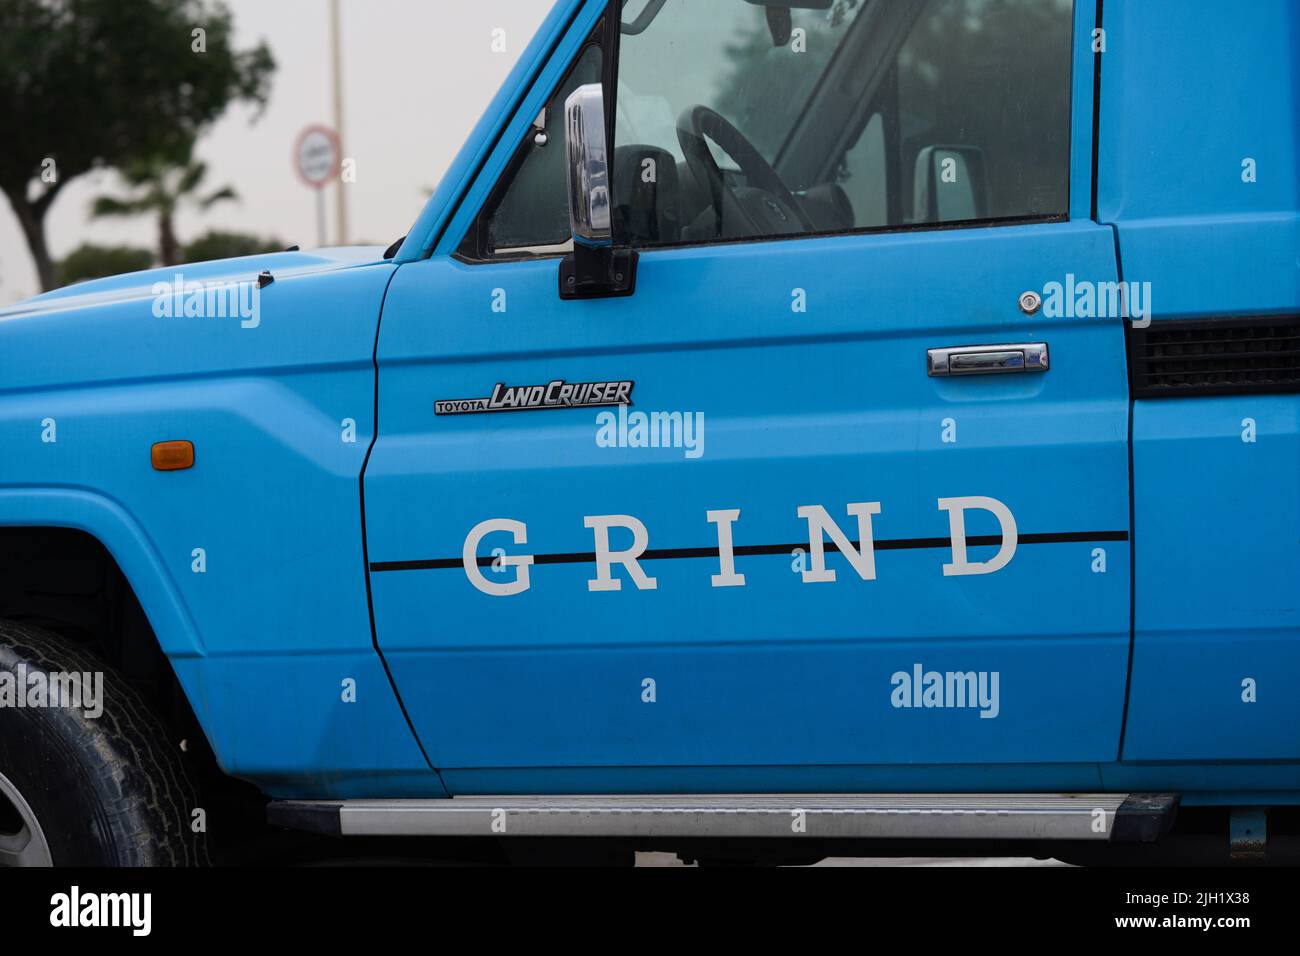 Grind truck cafe, blue truck. Stock Photo